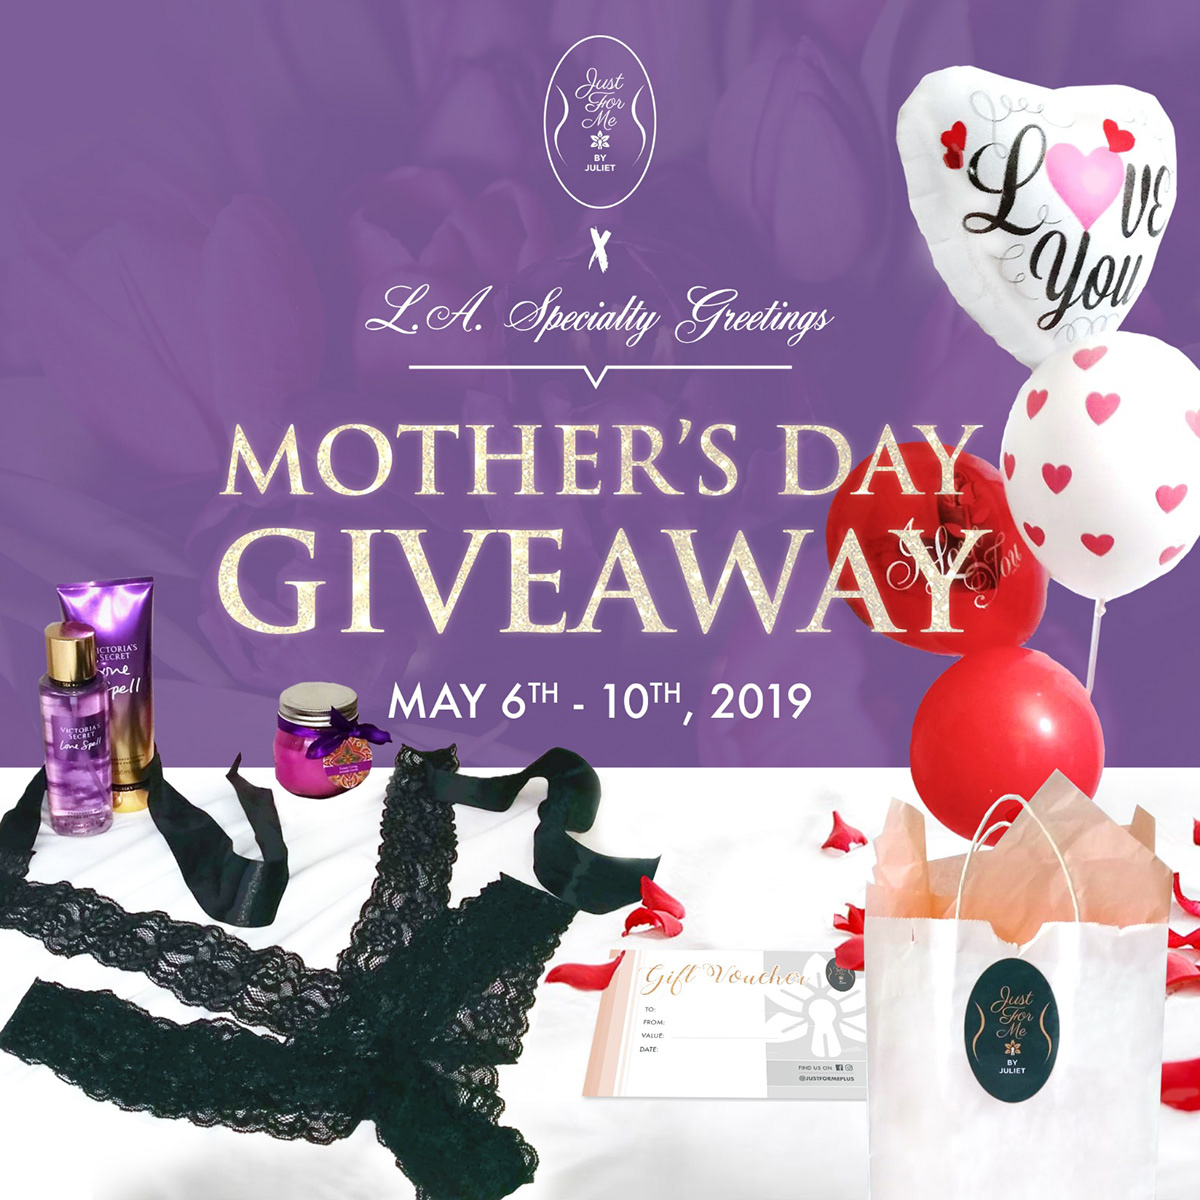 Mother's Day Promotion giveaway flyer advertisement